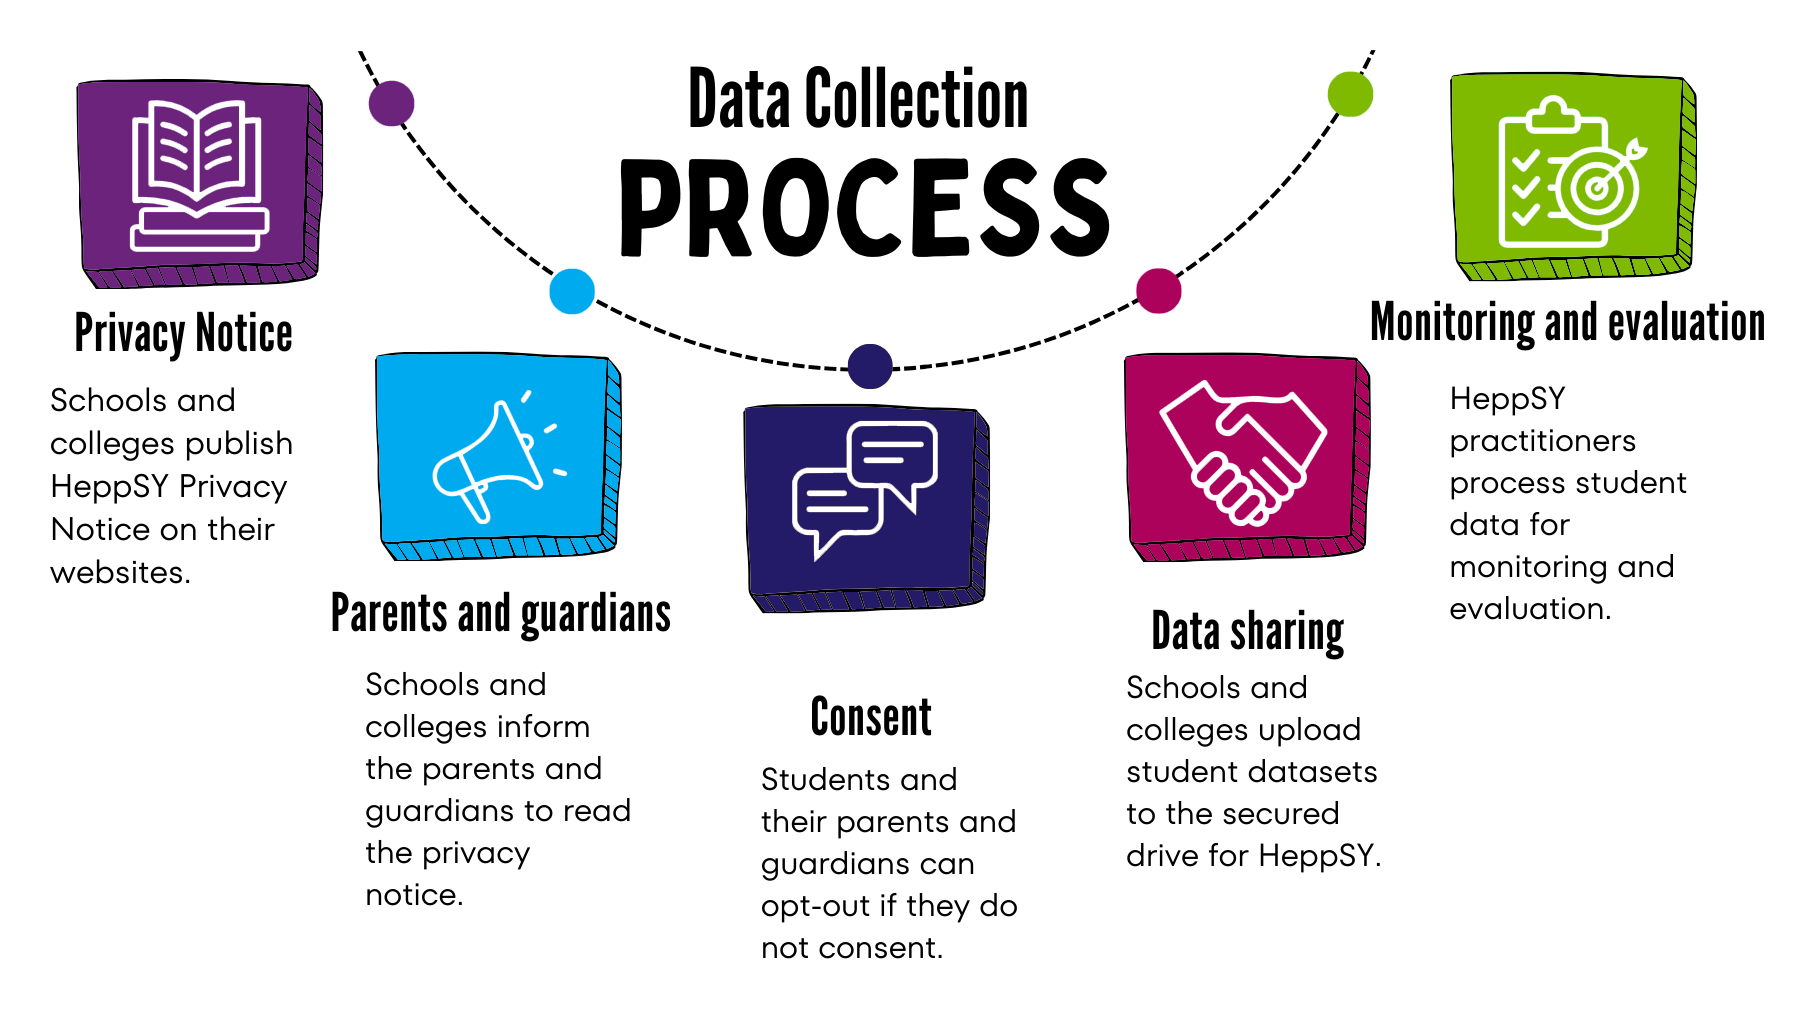 Data Collection Process

Privacy Notice
Schools and colleges publish HeppSY Privacy Notice on their websites.

Parents and guardians
Schools and colleges inform the parents and guardians to read the privacy notice.

Consent
Students and their parents and guardians can opt-out if they do not consent.

Data sharing
Schools and colleges upload student datasets to the secured drive for HeppSY.

Monitoring and evaluation
HeppSY practitioners process student data for monitoring and evaluation.